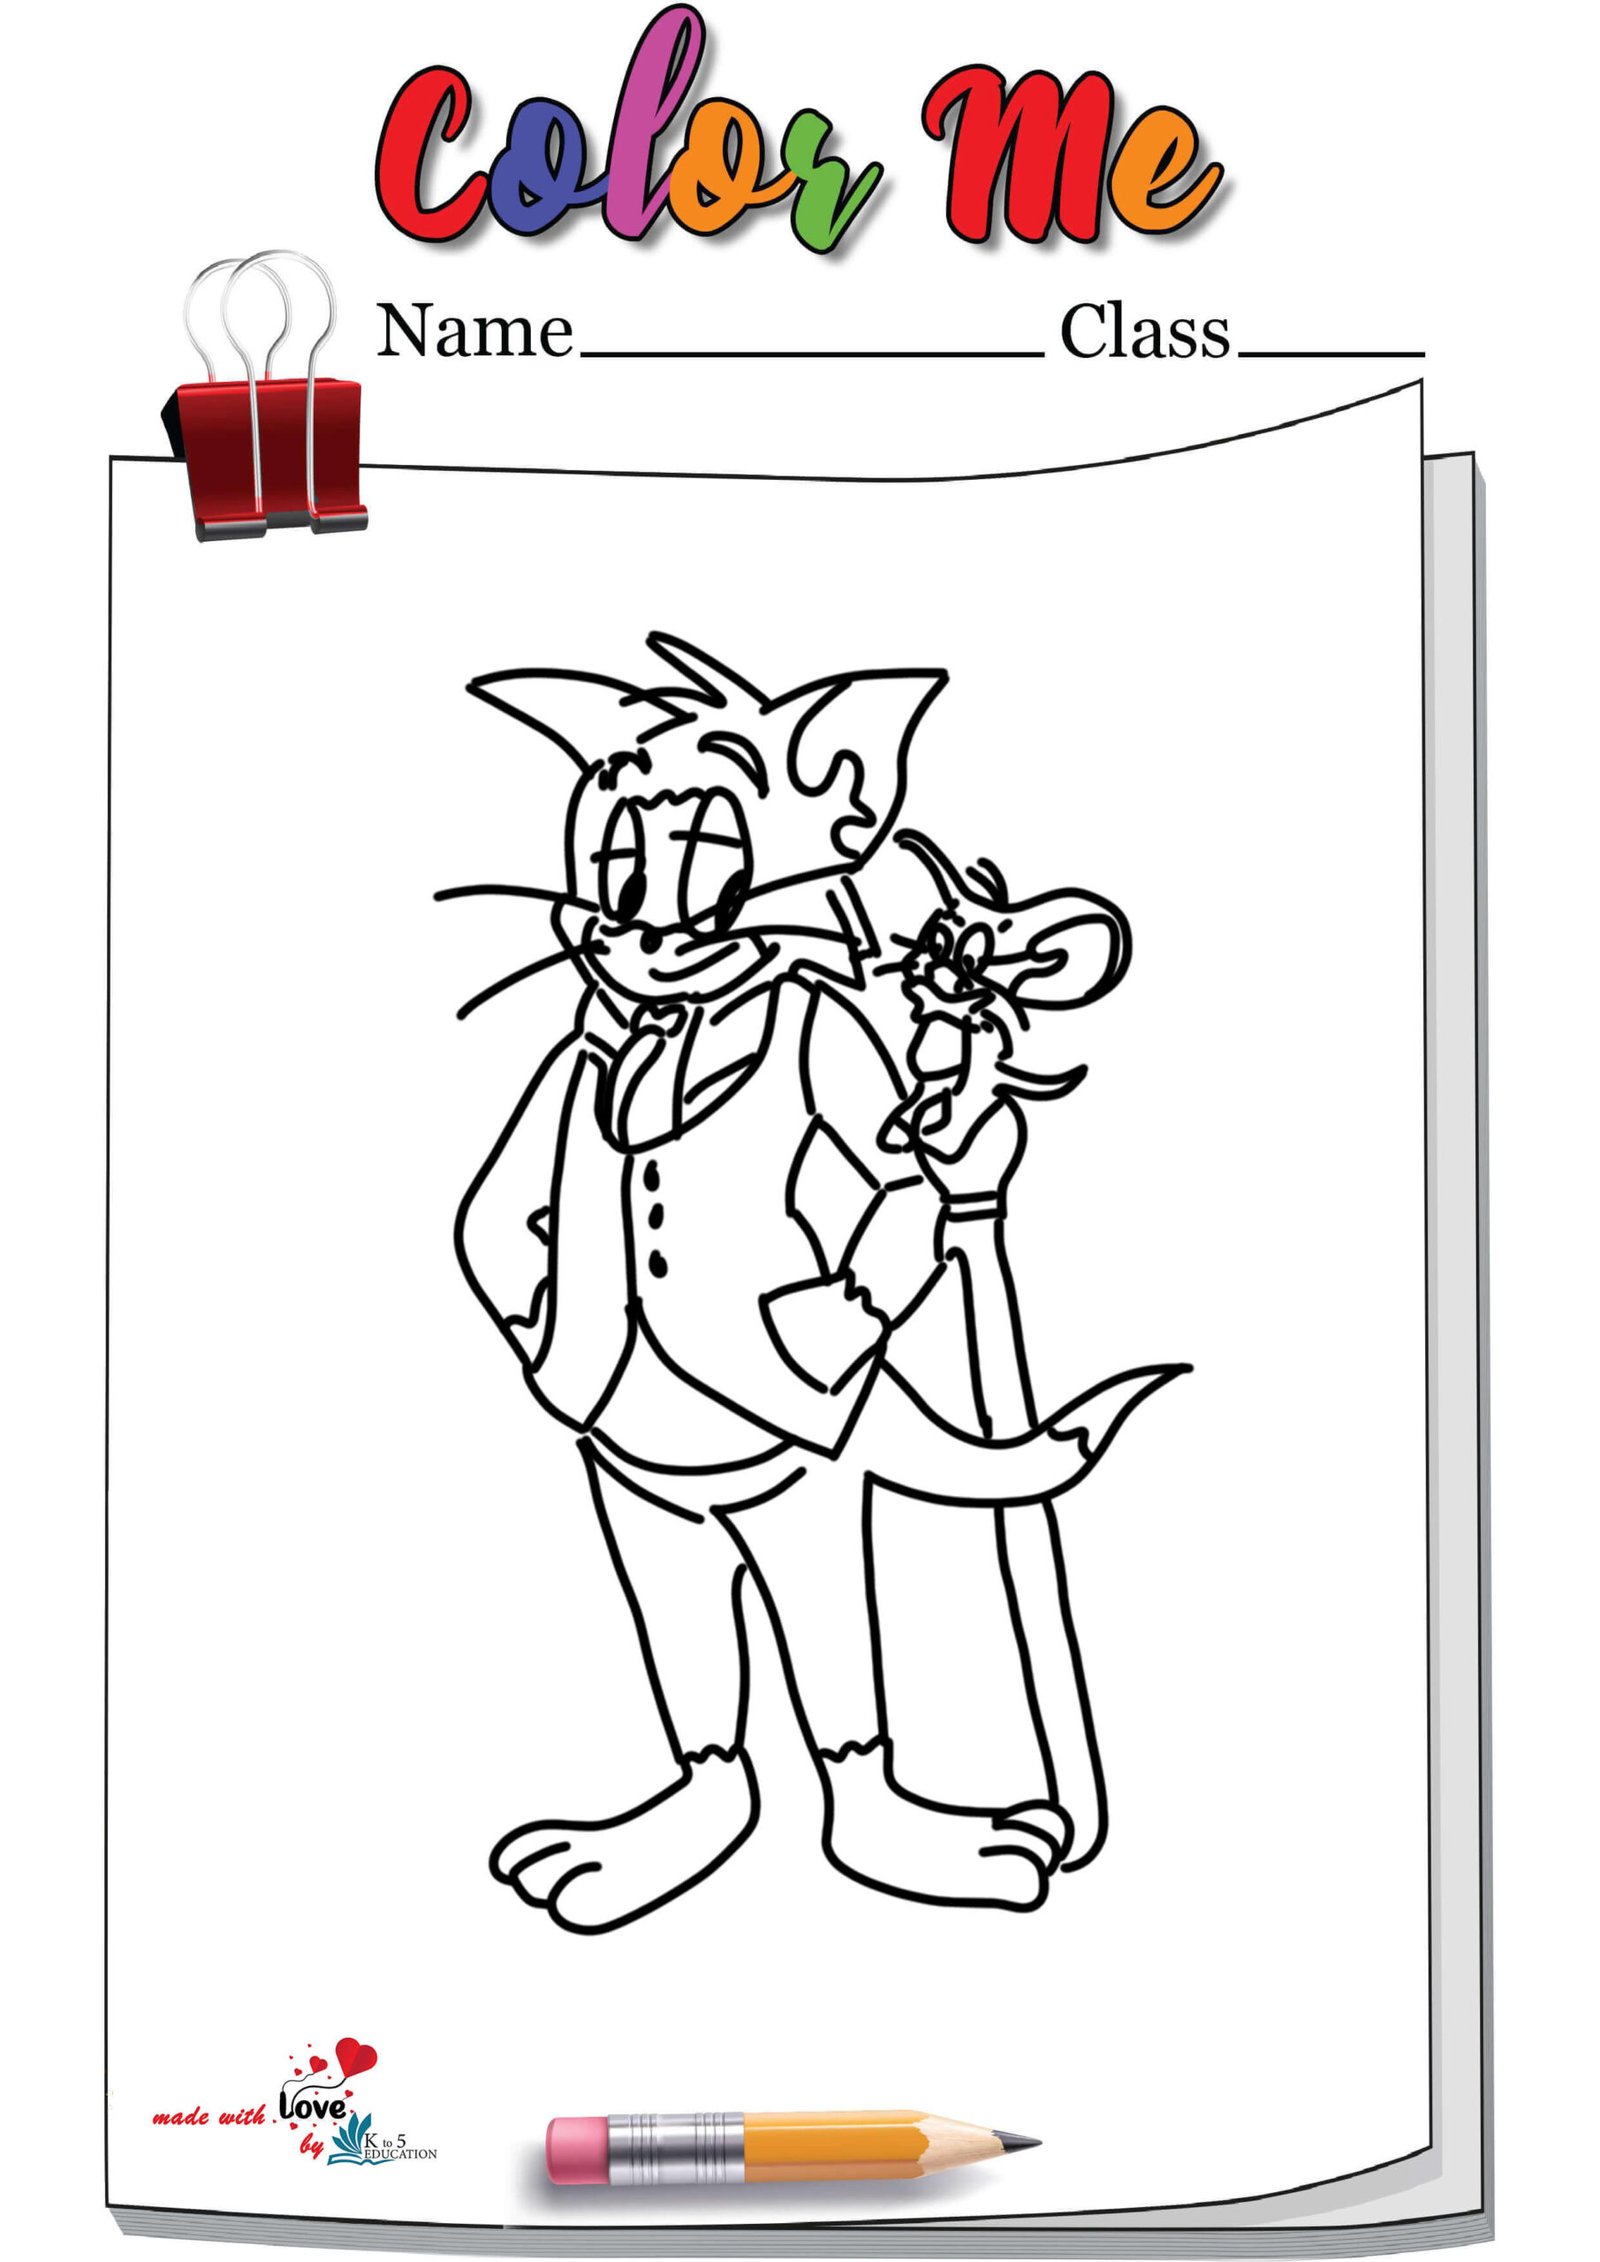 Cartoon Tom And Jerry Coloring Page